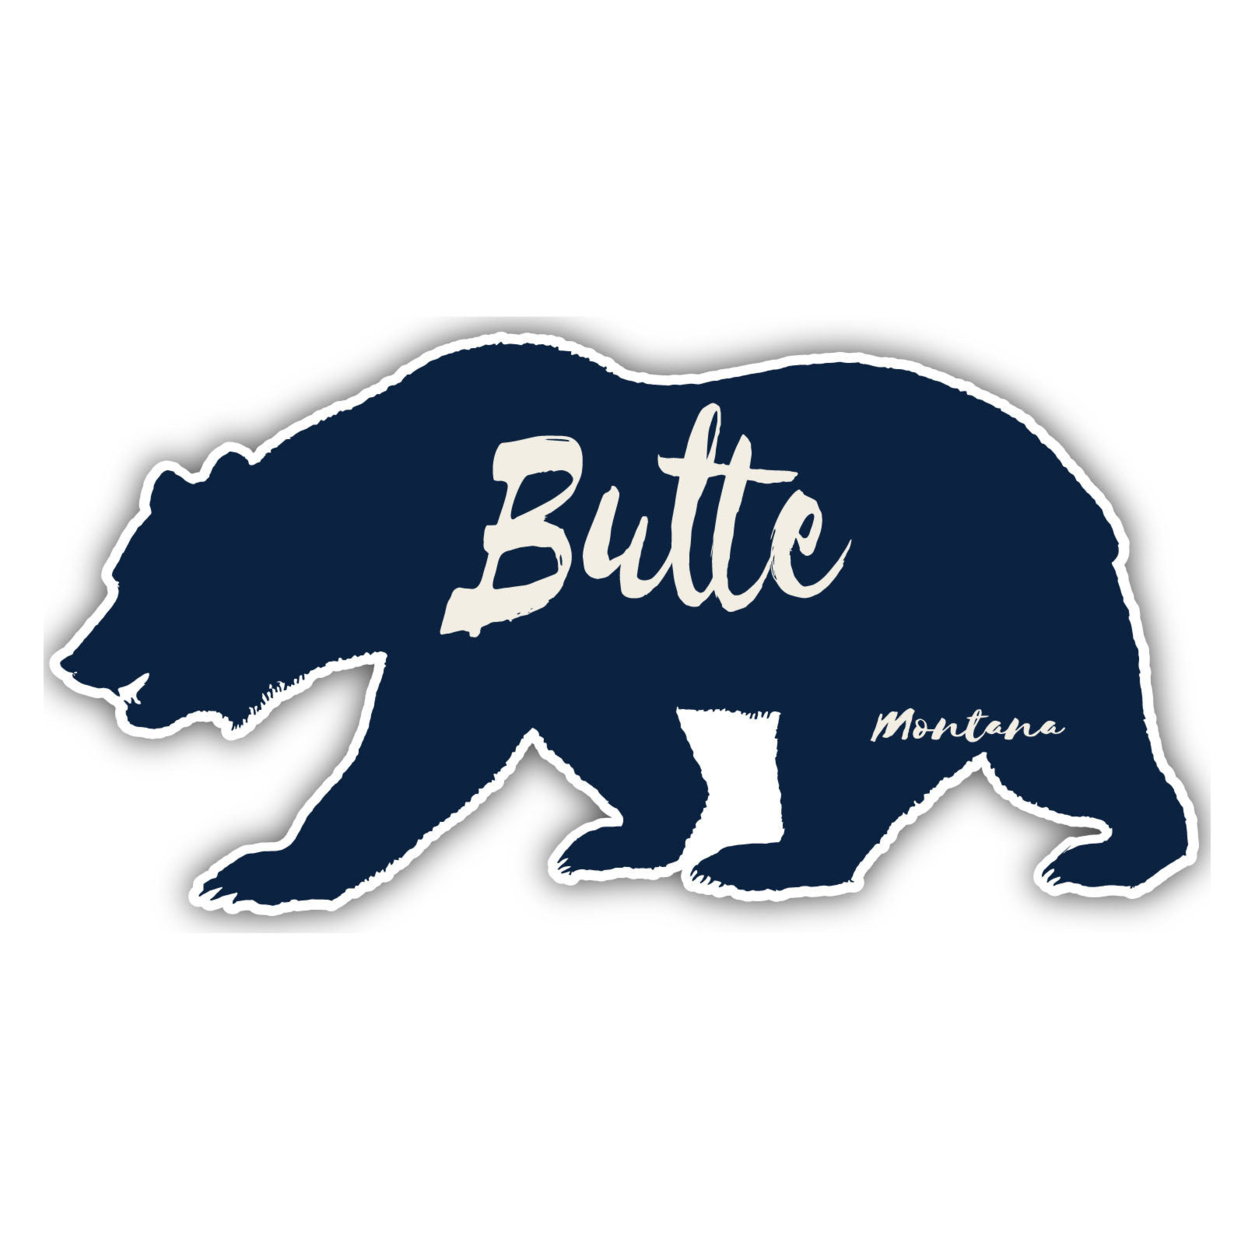 Butte Montana Souvenir Decorative Stickers (Choose Theme And Size) - 4-Pack, 8-Inch, Bear